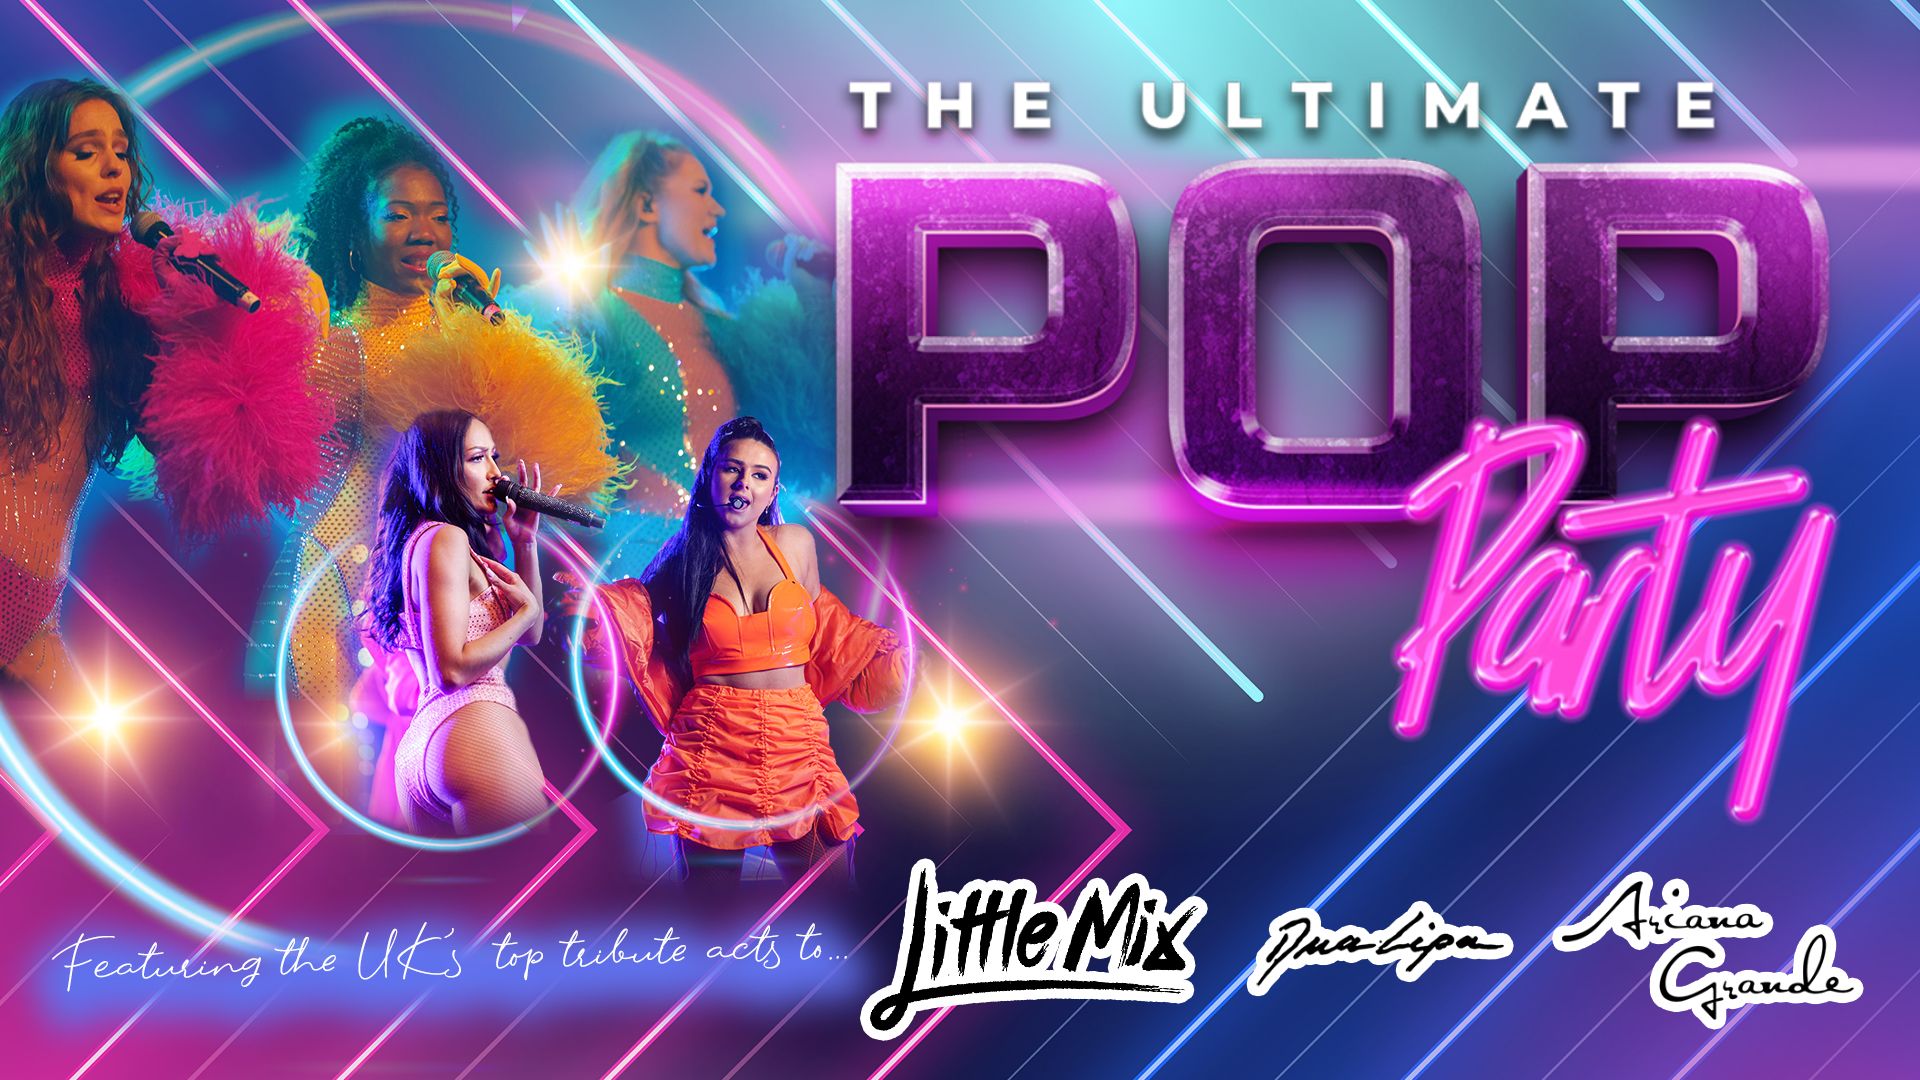 Ultimate Pop Party